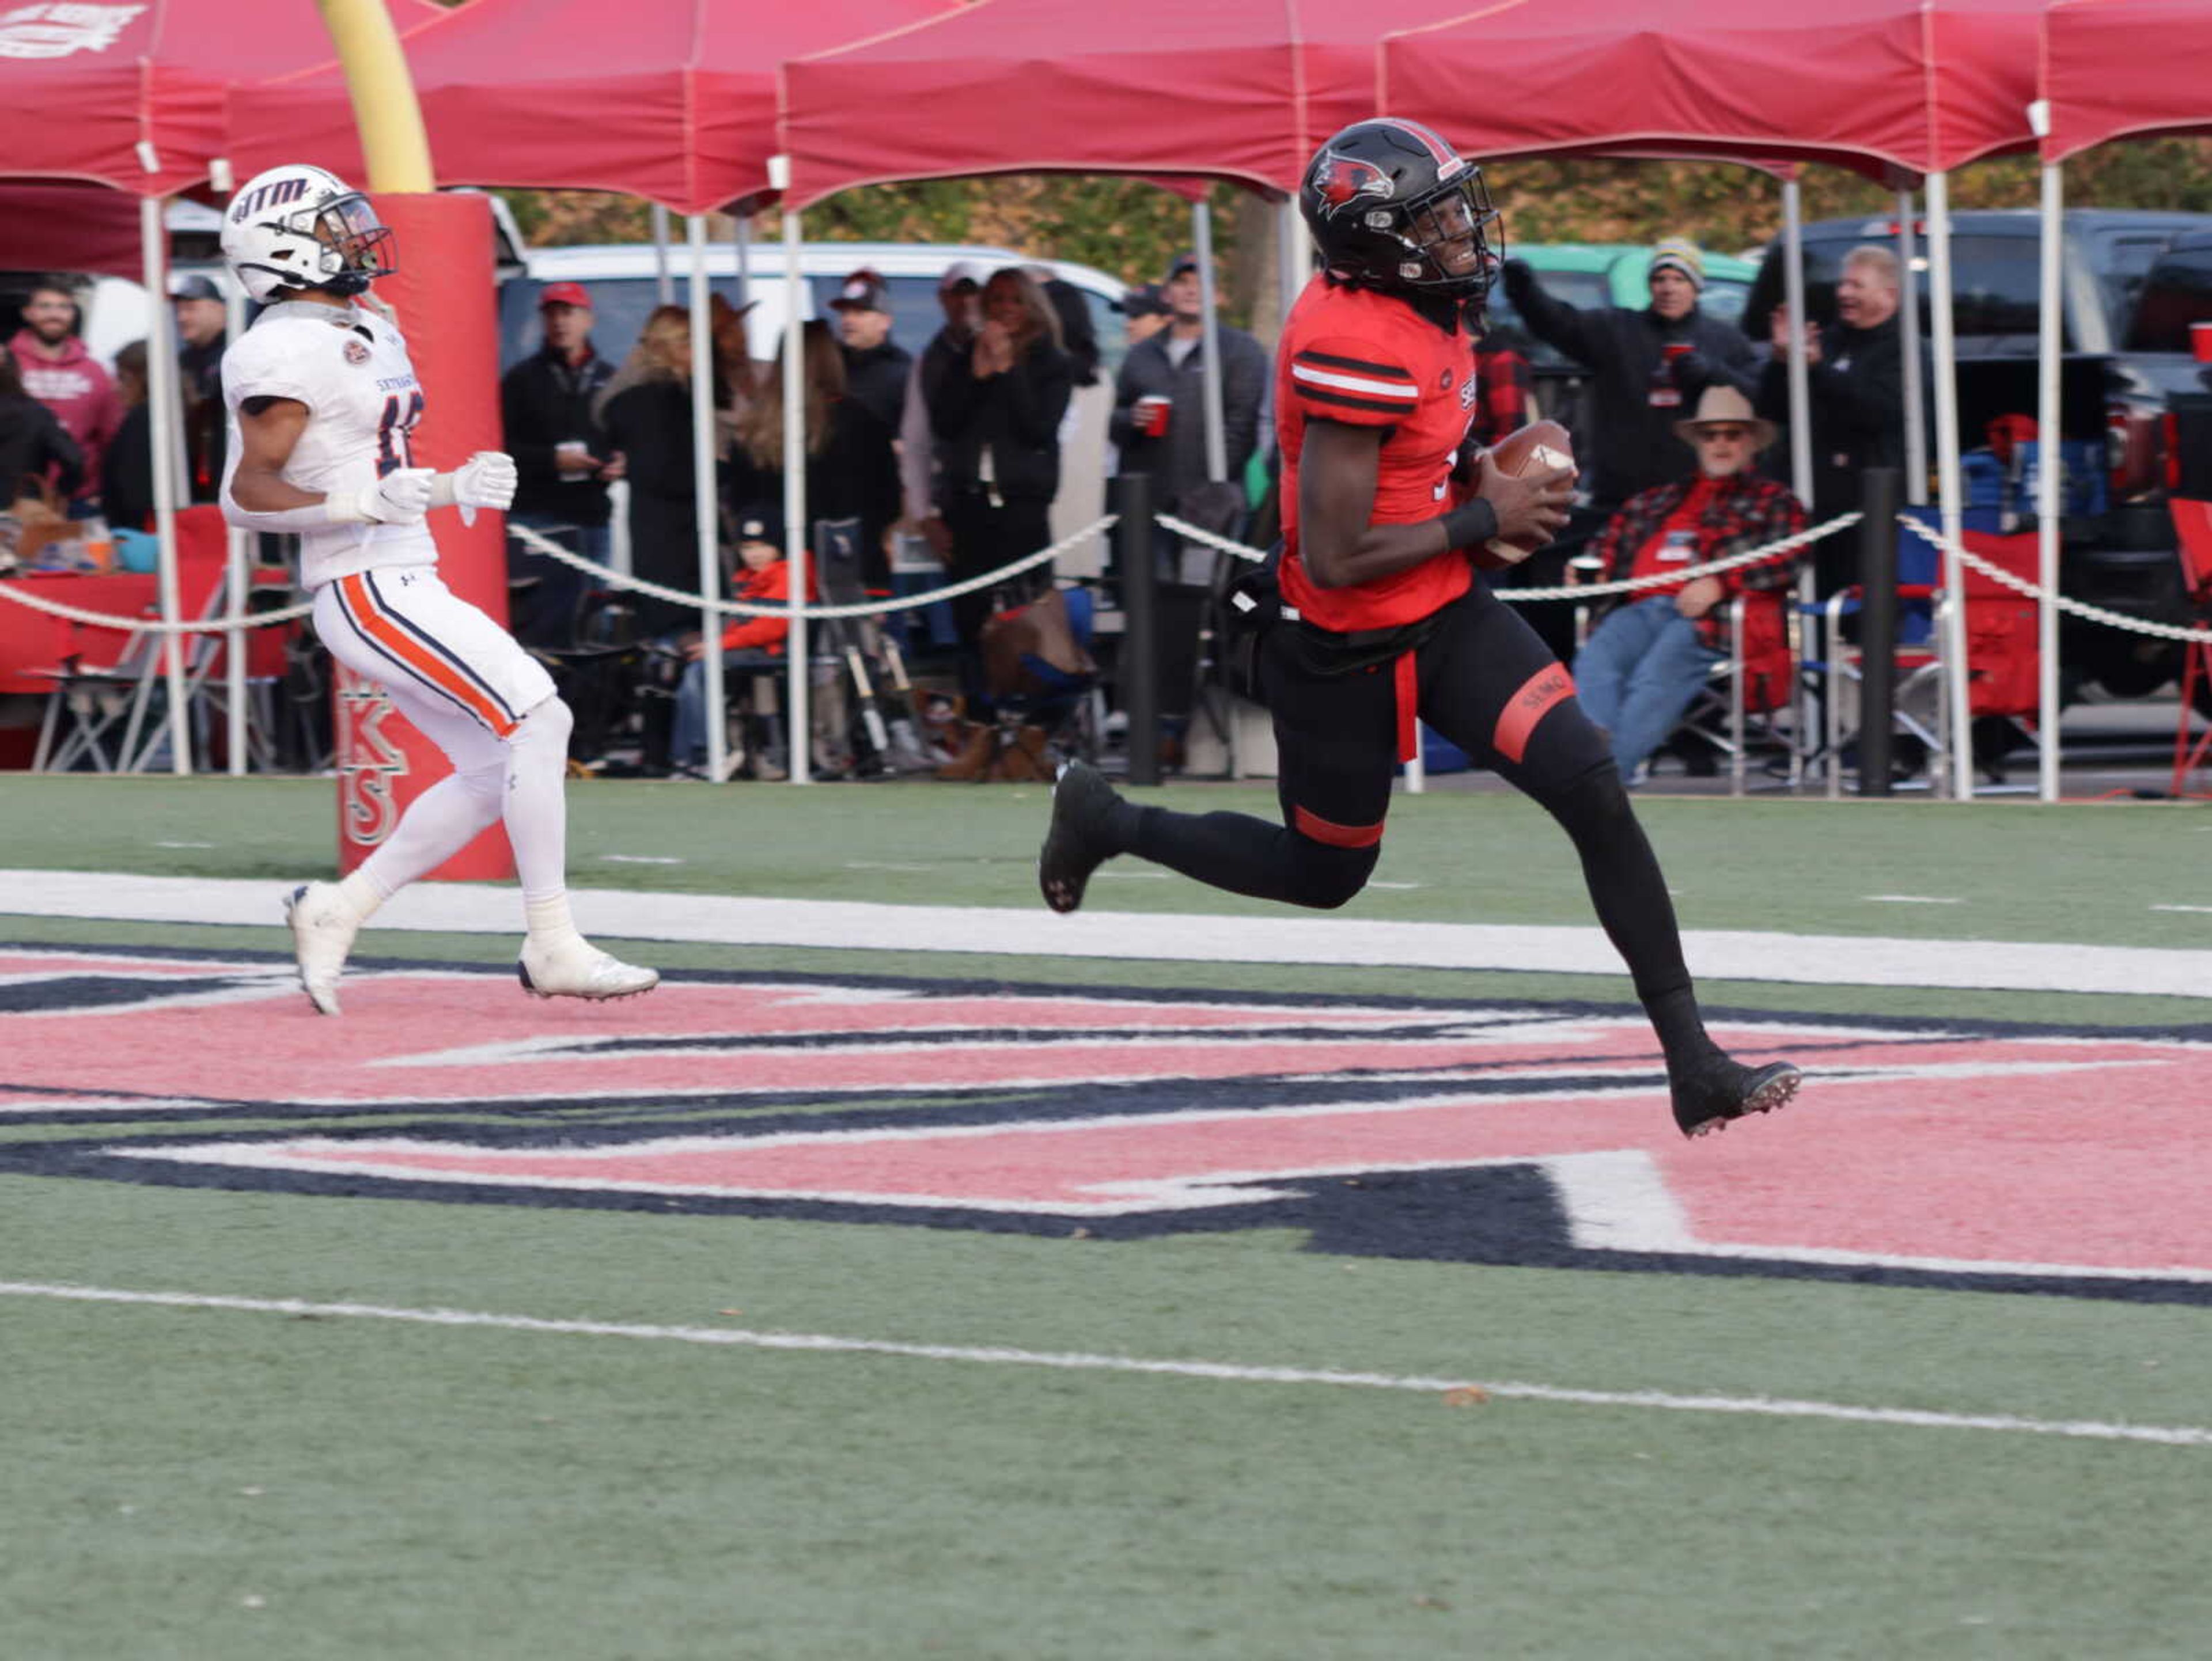 Junior quarterback CJ Ogbonna runs in a touchdown during the Redhawks' game against the UT Martin Skyhawks on Nov. 20. Southeast brought home the win 31-14.